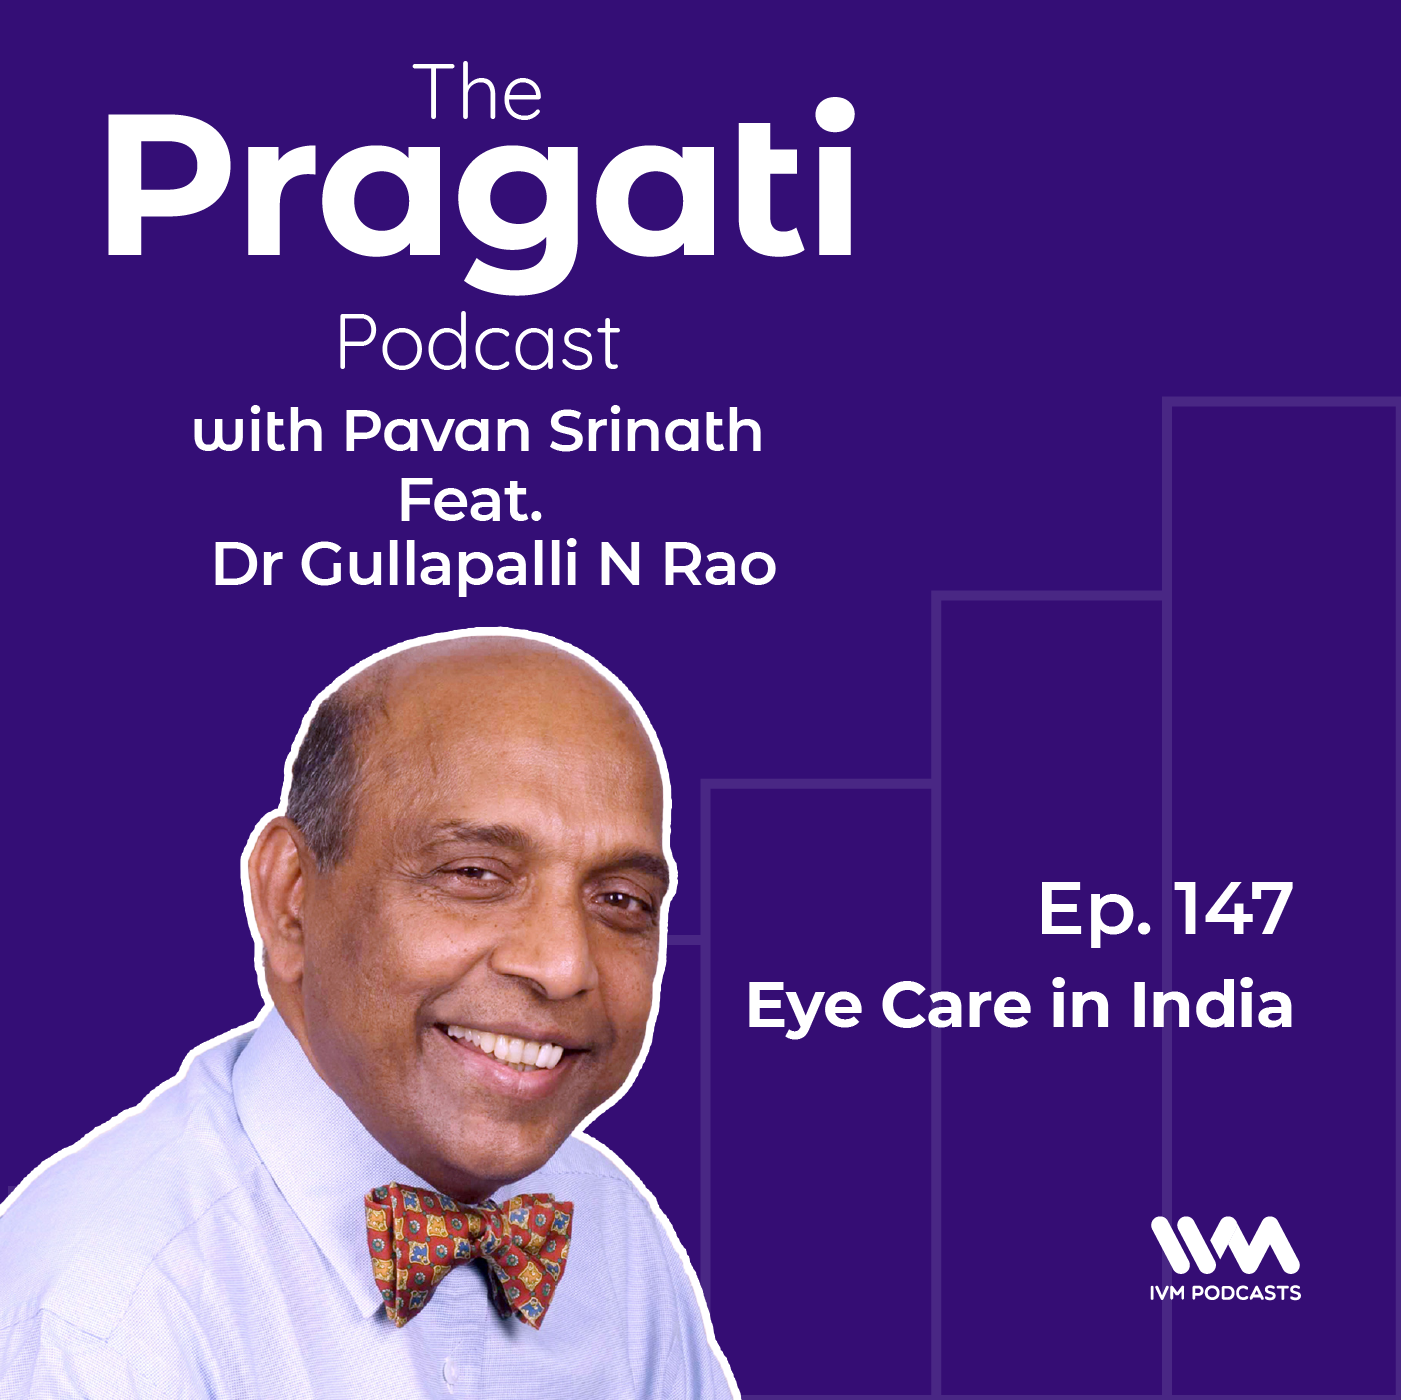 Ep. 147: Eye Care in India